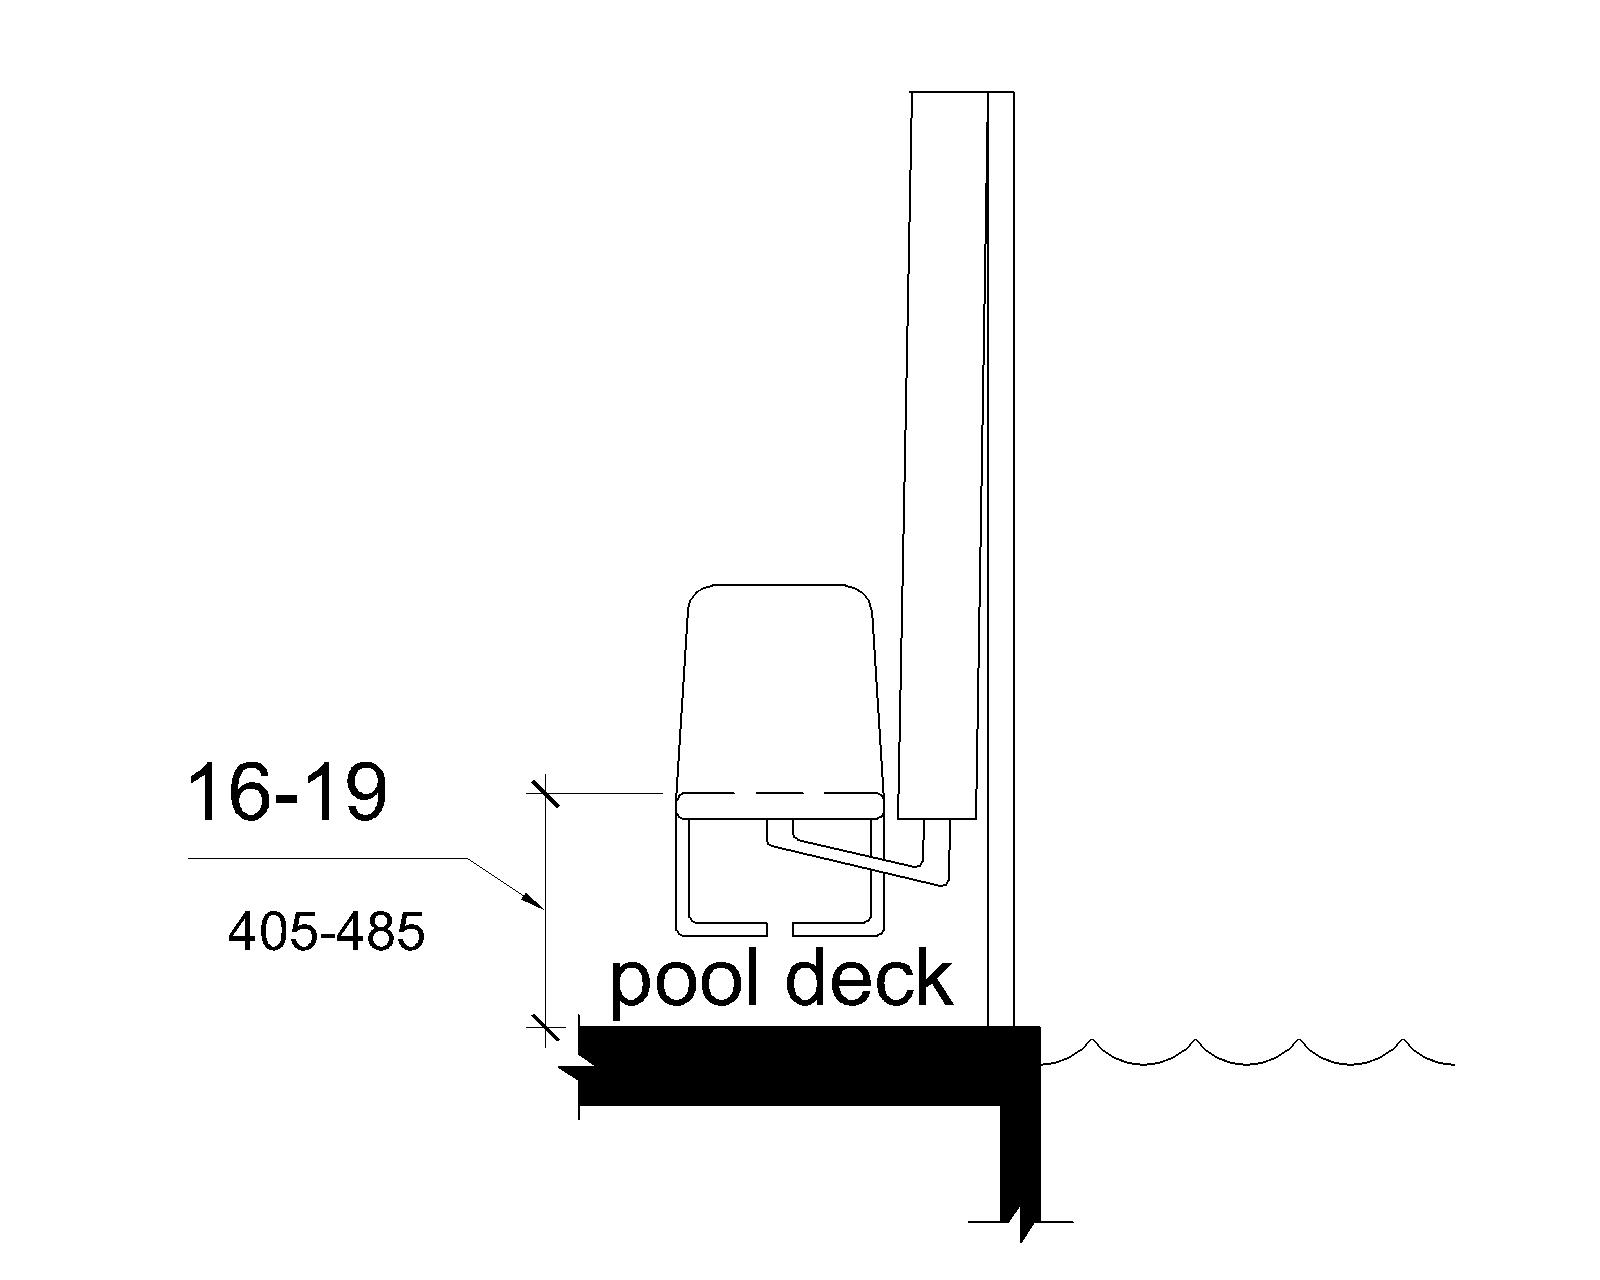 An elevation drawing shows pool lift seat height to be 16 to 19 inches (405 to 485 mm) measured from the deck surface to the top of the seat surface when in the raised (load) position.